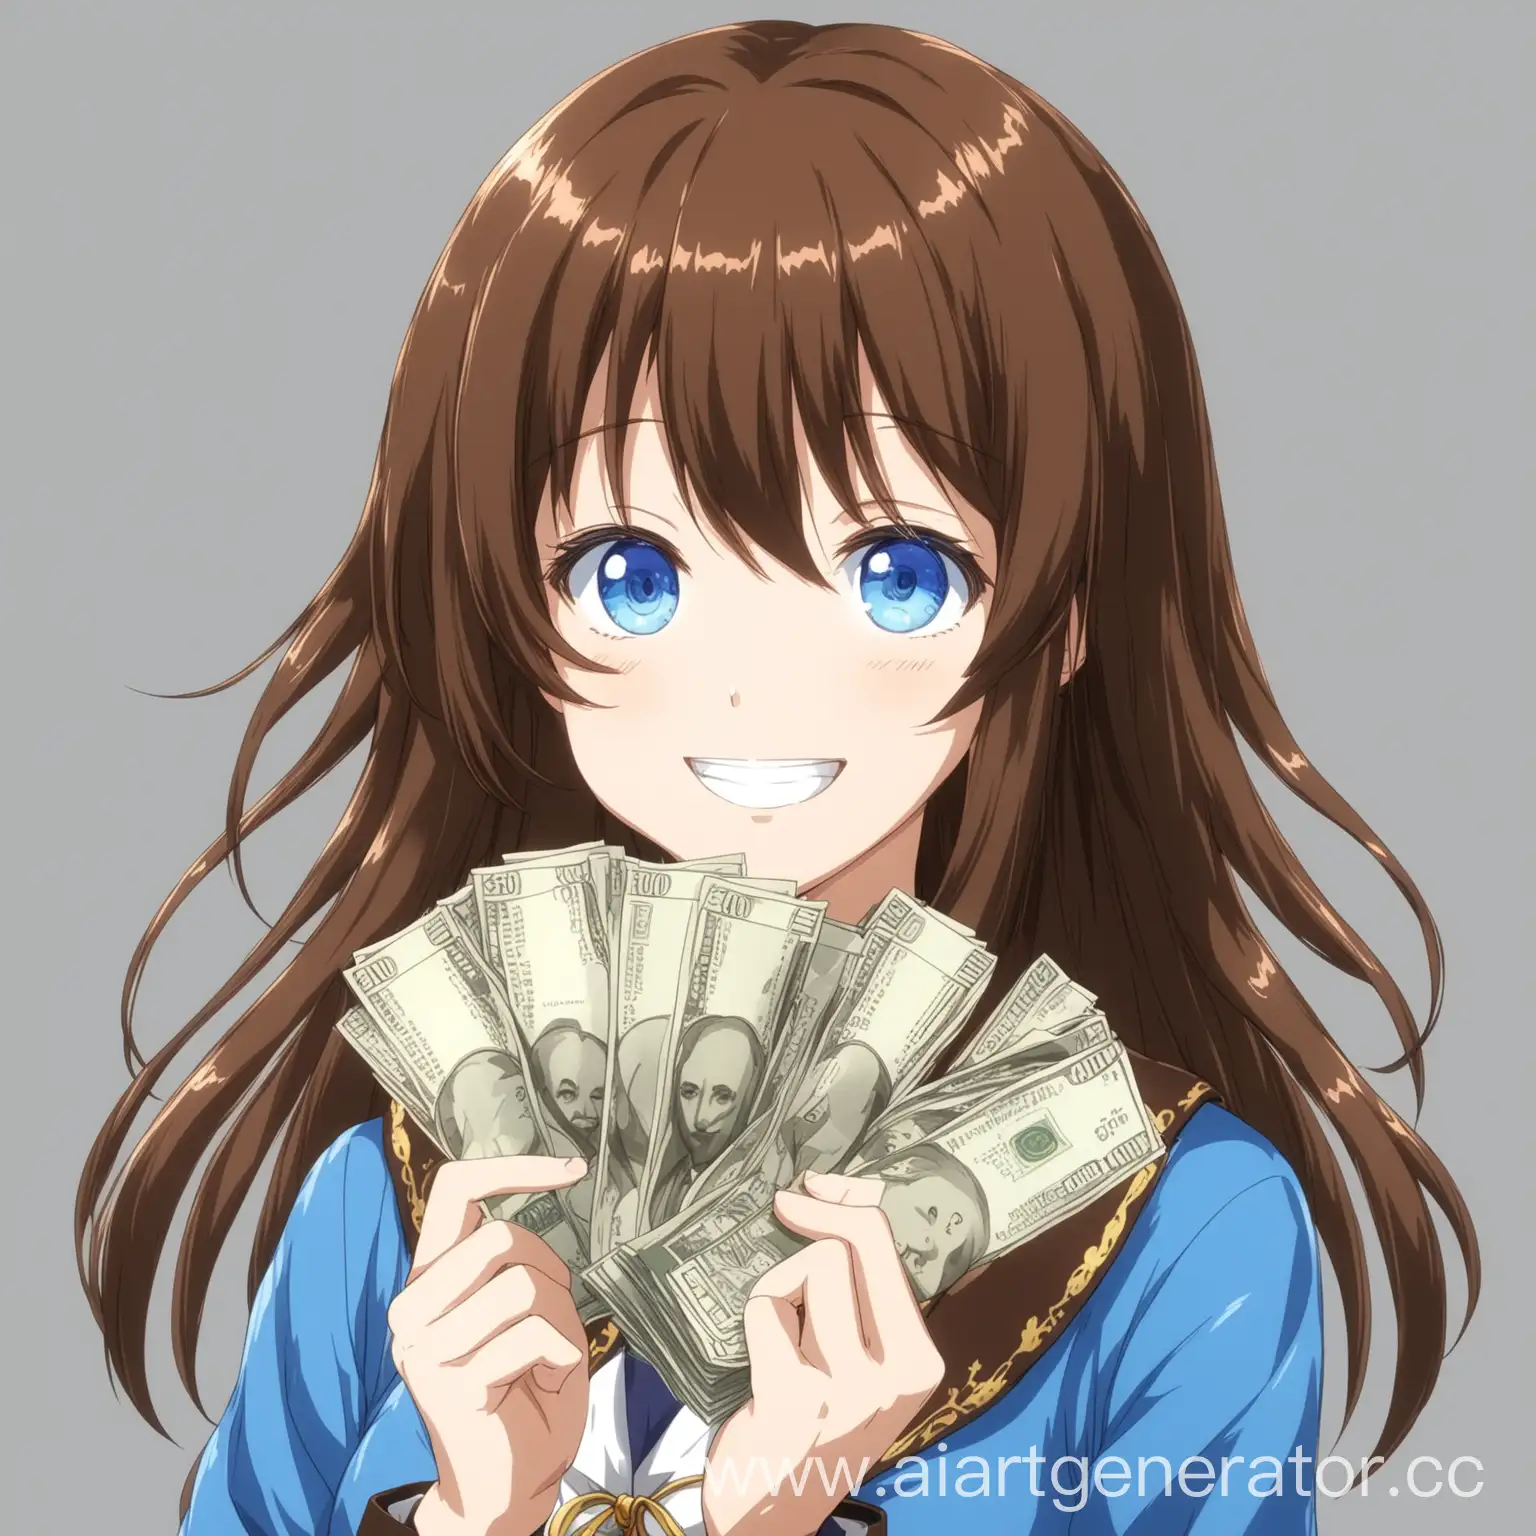 Anime-Girl-with-Brown-Hair-and-Blue-Eyes-Holding-Money-in-Happiness